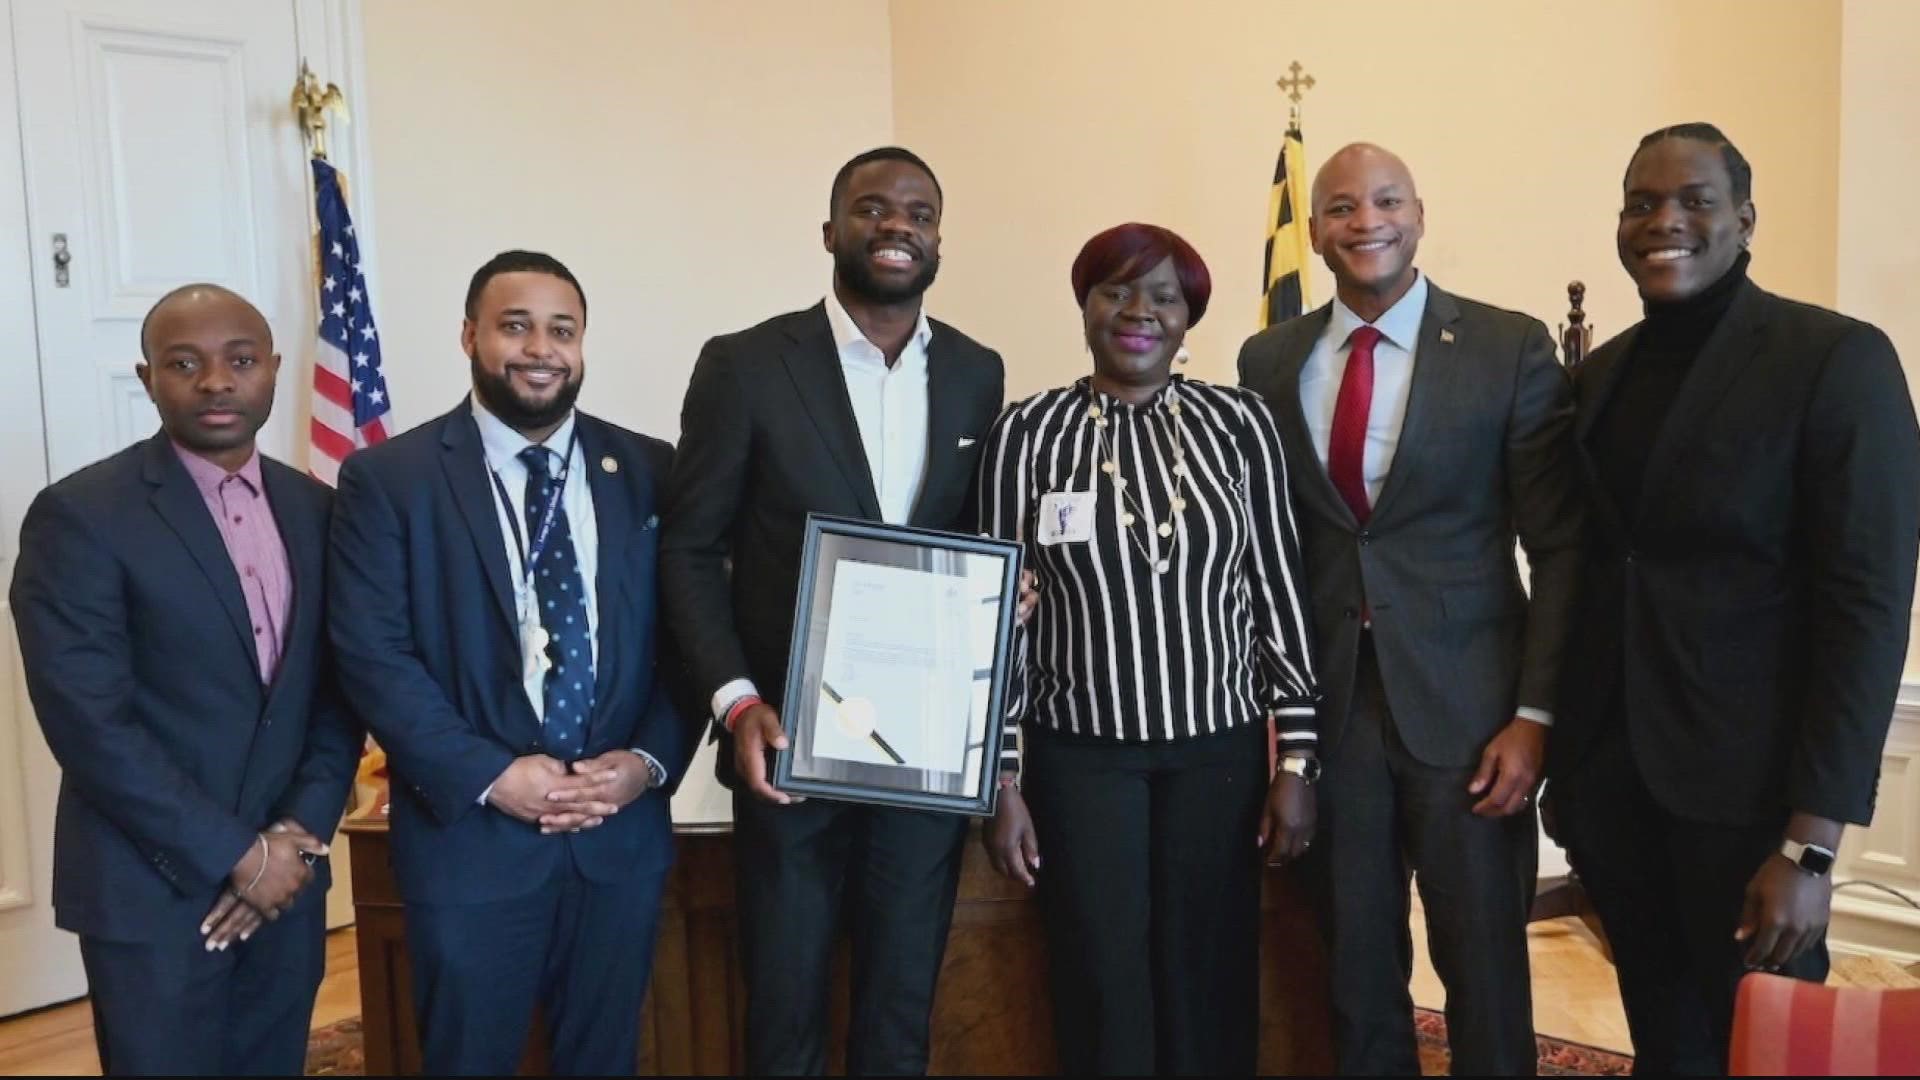 THE VICTORY LAP CONTINUES FOR LOCAL TENNIS STAR FRANCES TIAFOE. THE PRINCE GEORGE'S COUNTY NATIVE AND US OPEN SEMIFINALIST HELD CENTER COURT TODAY IN ANNAPOLIS